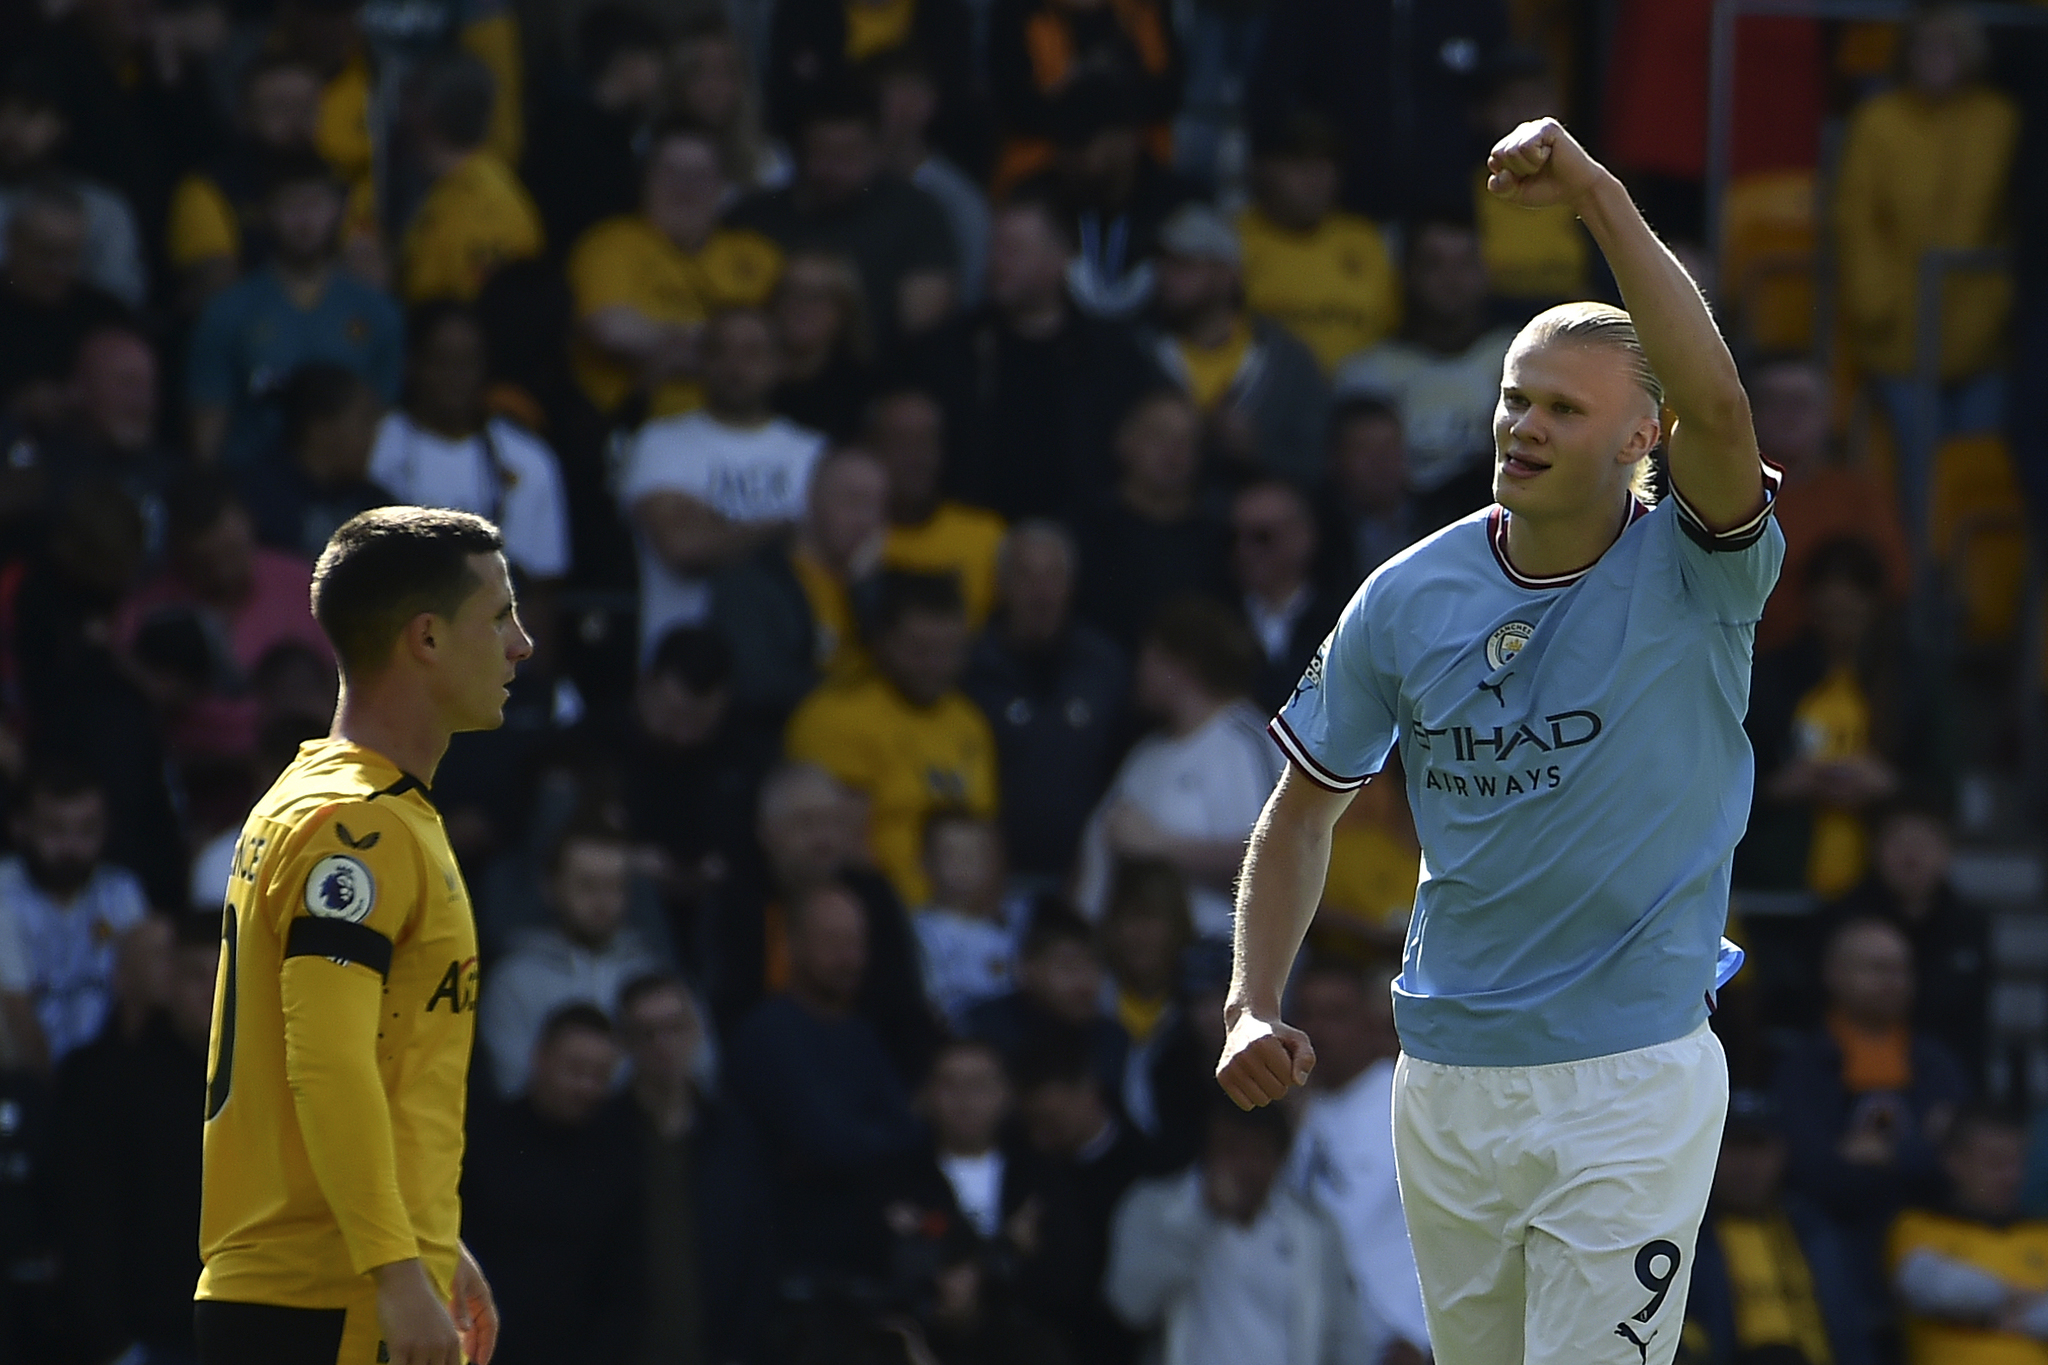 Haaland celebrates for Manchester City against Wolves. AP.